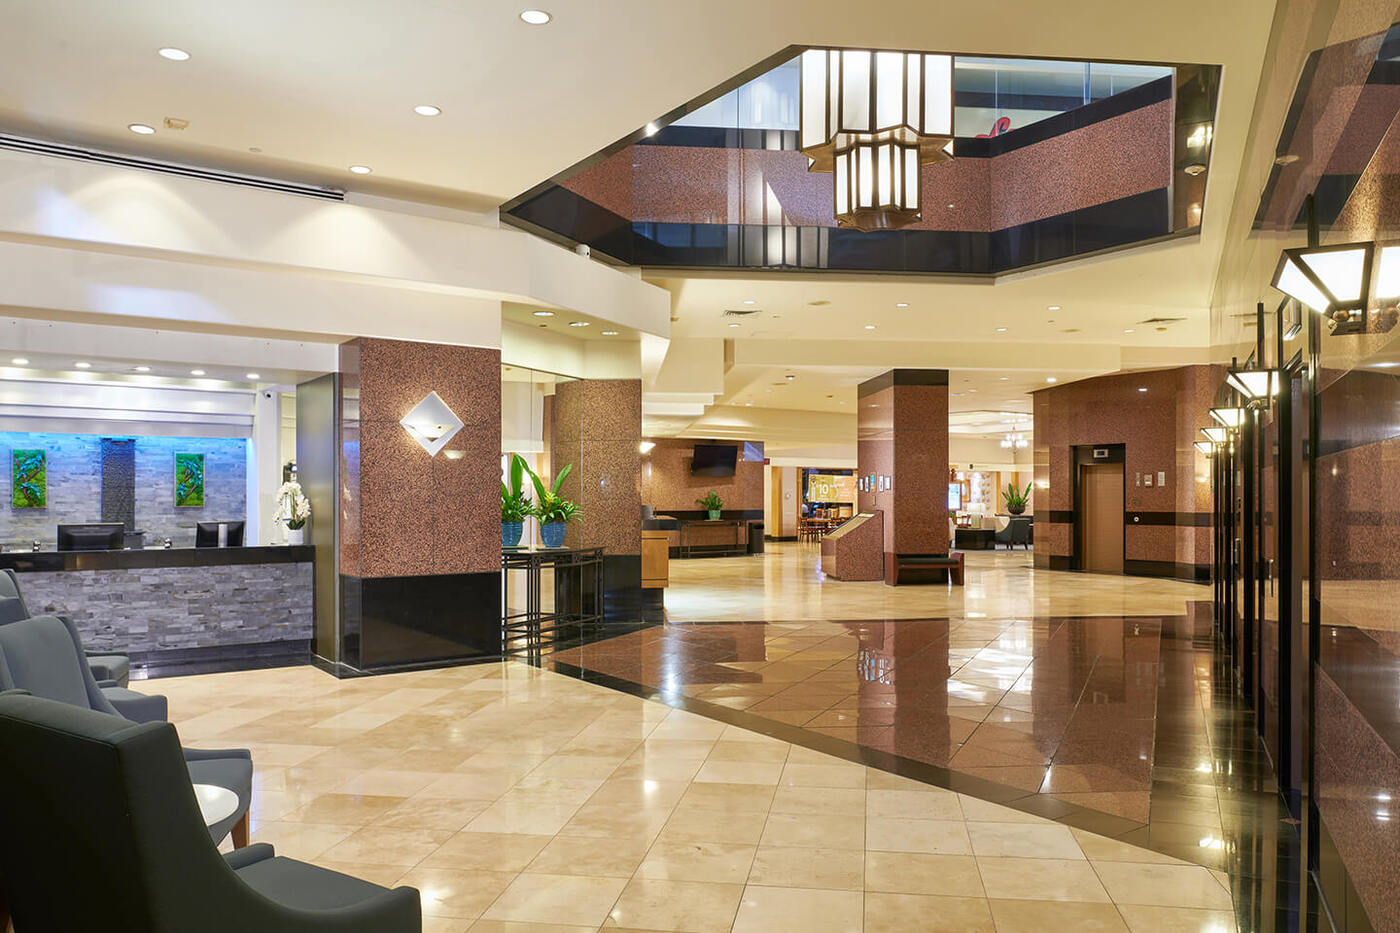 Lobby with front desk, seating, and elevators